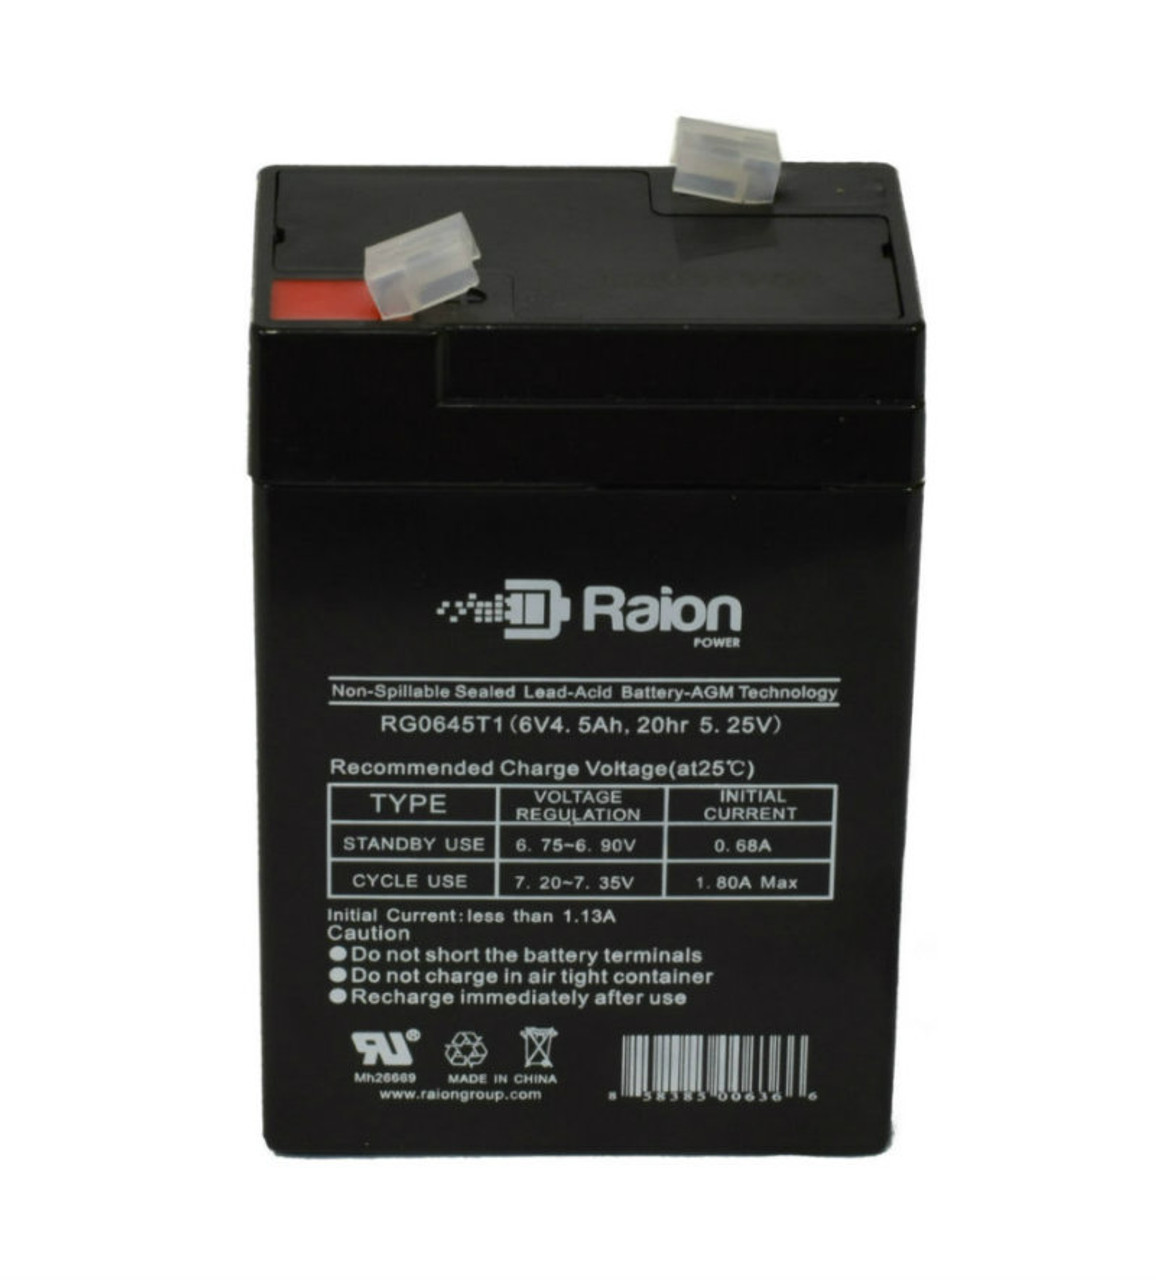 Raion Power RG0645T1 Replacement Battery Cartridge for Light Alarms 5E15AA